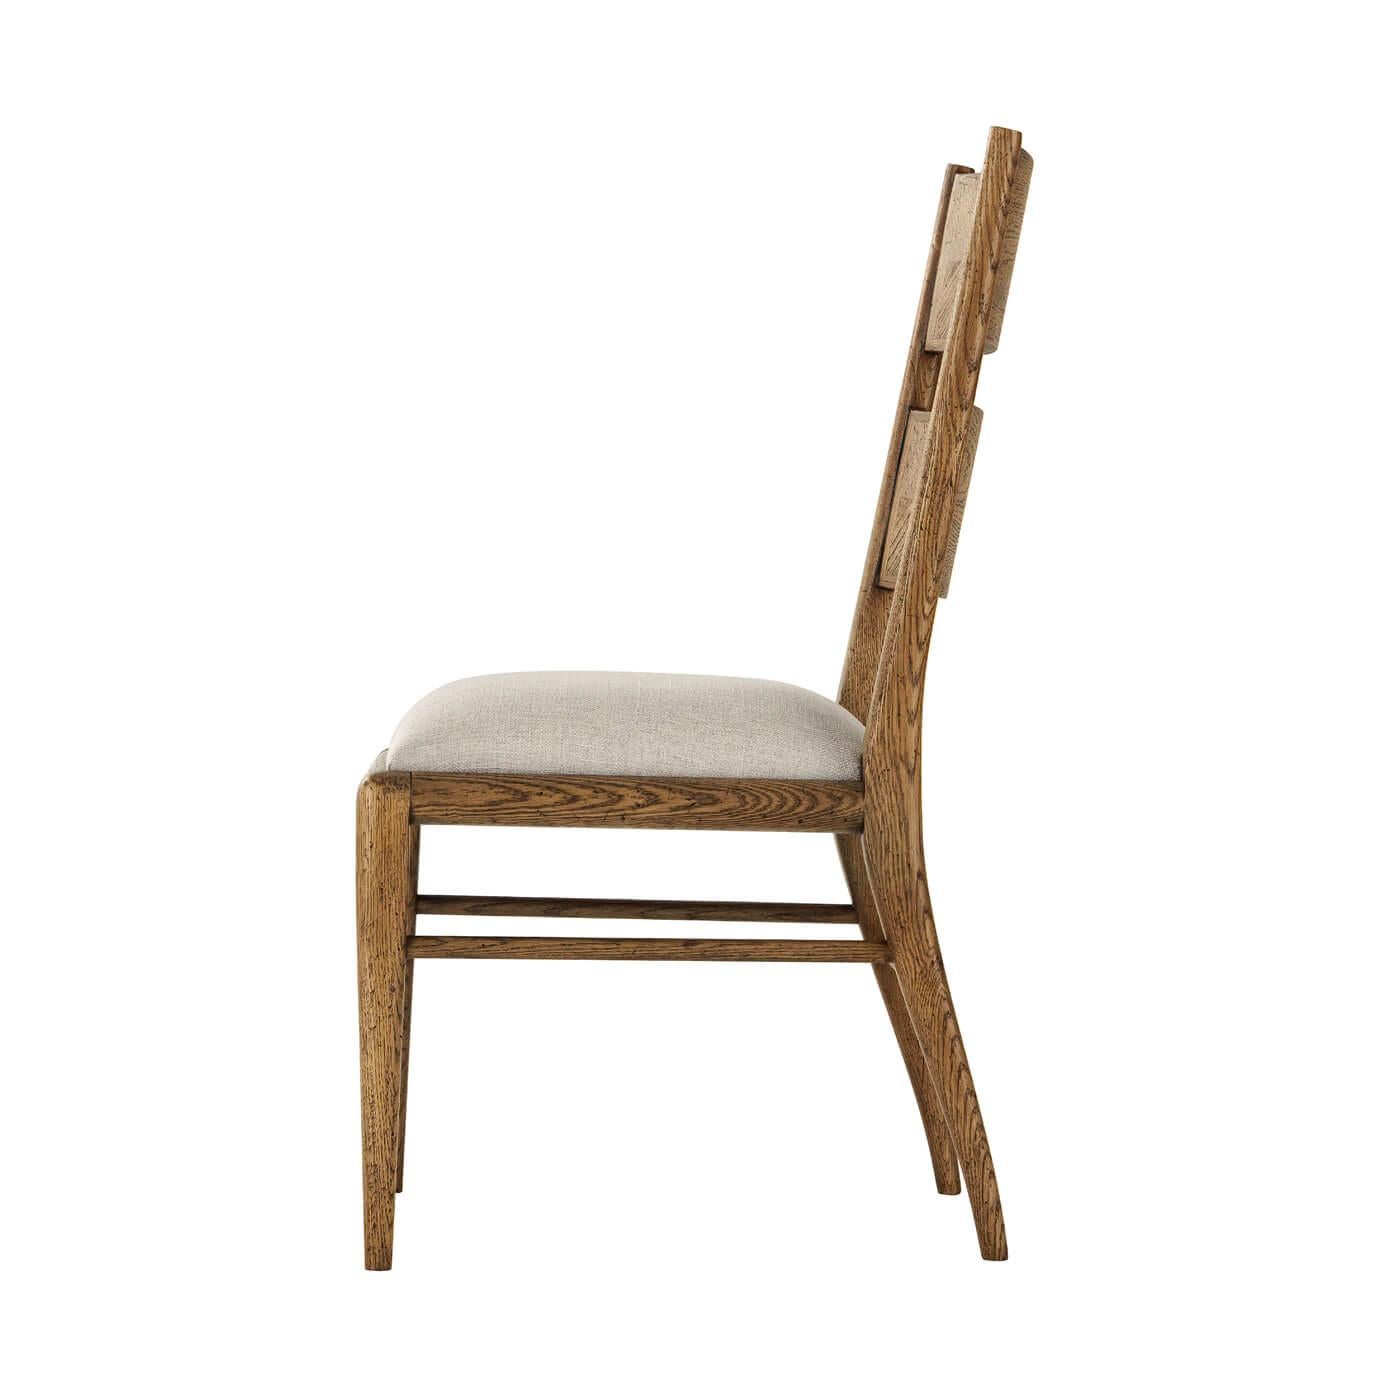 A light oak parquetry dining chair with tapered oak legs. Its upholstered seat is constructed with a top and mid-rail bar joined by stretchers. 
Shown in dawn finish
Shown in Linen-UP5409 Fabric
Dimensions
19.5